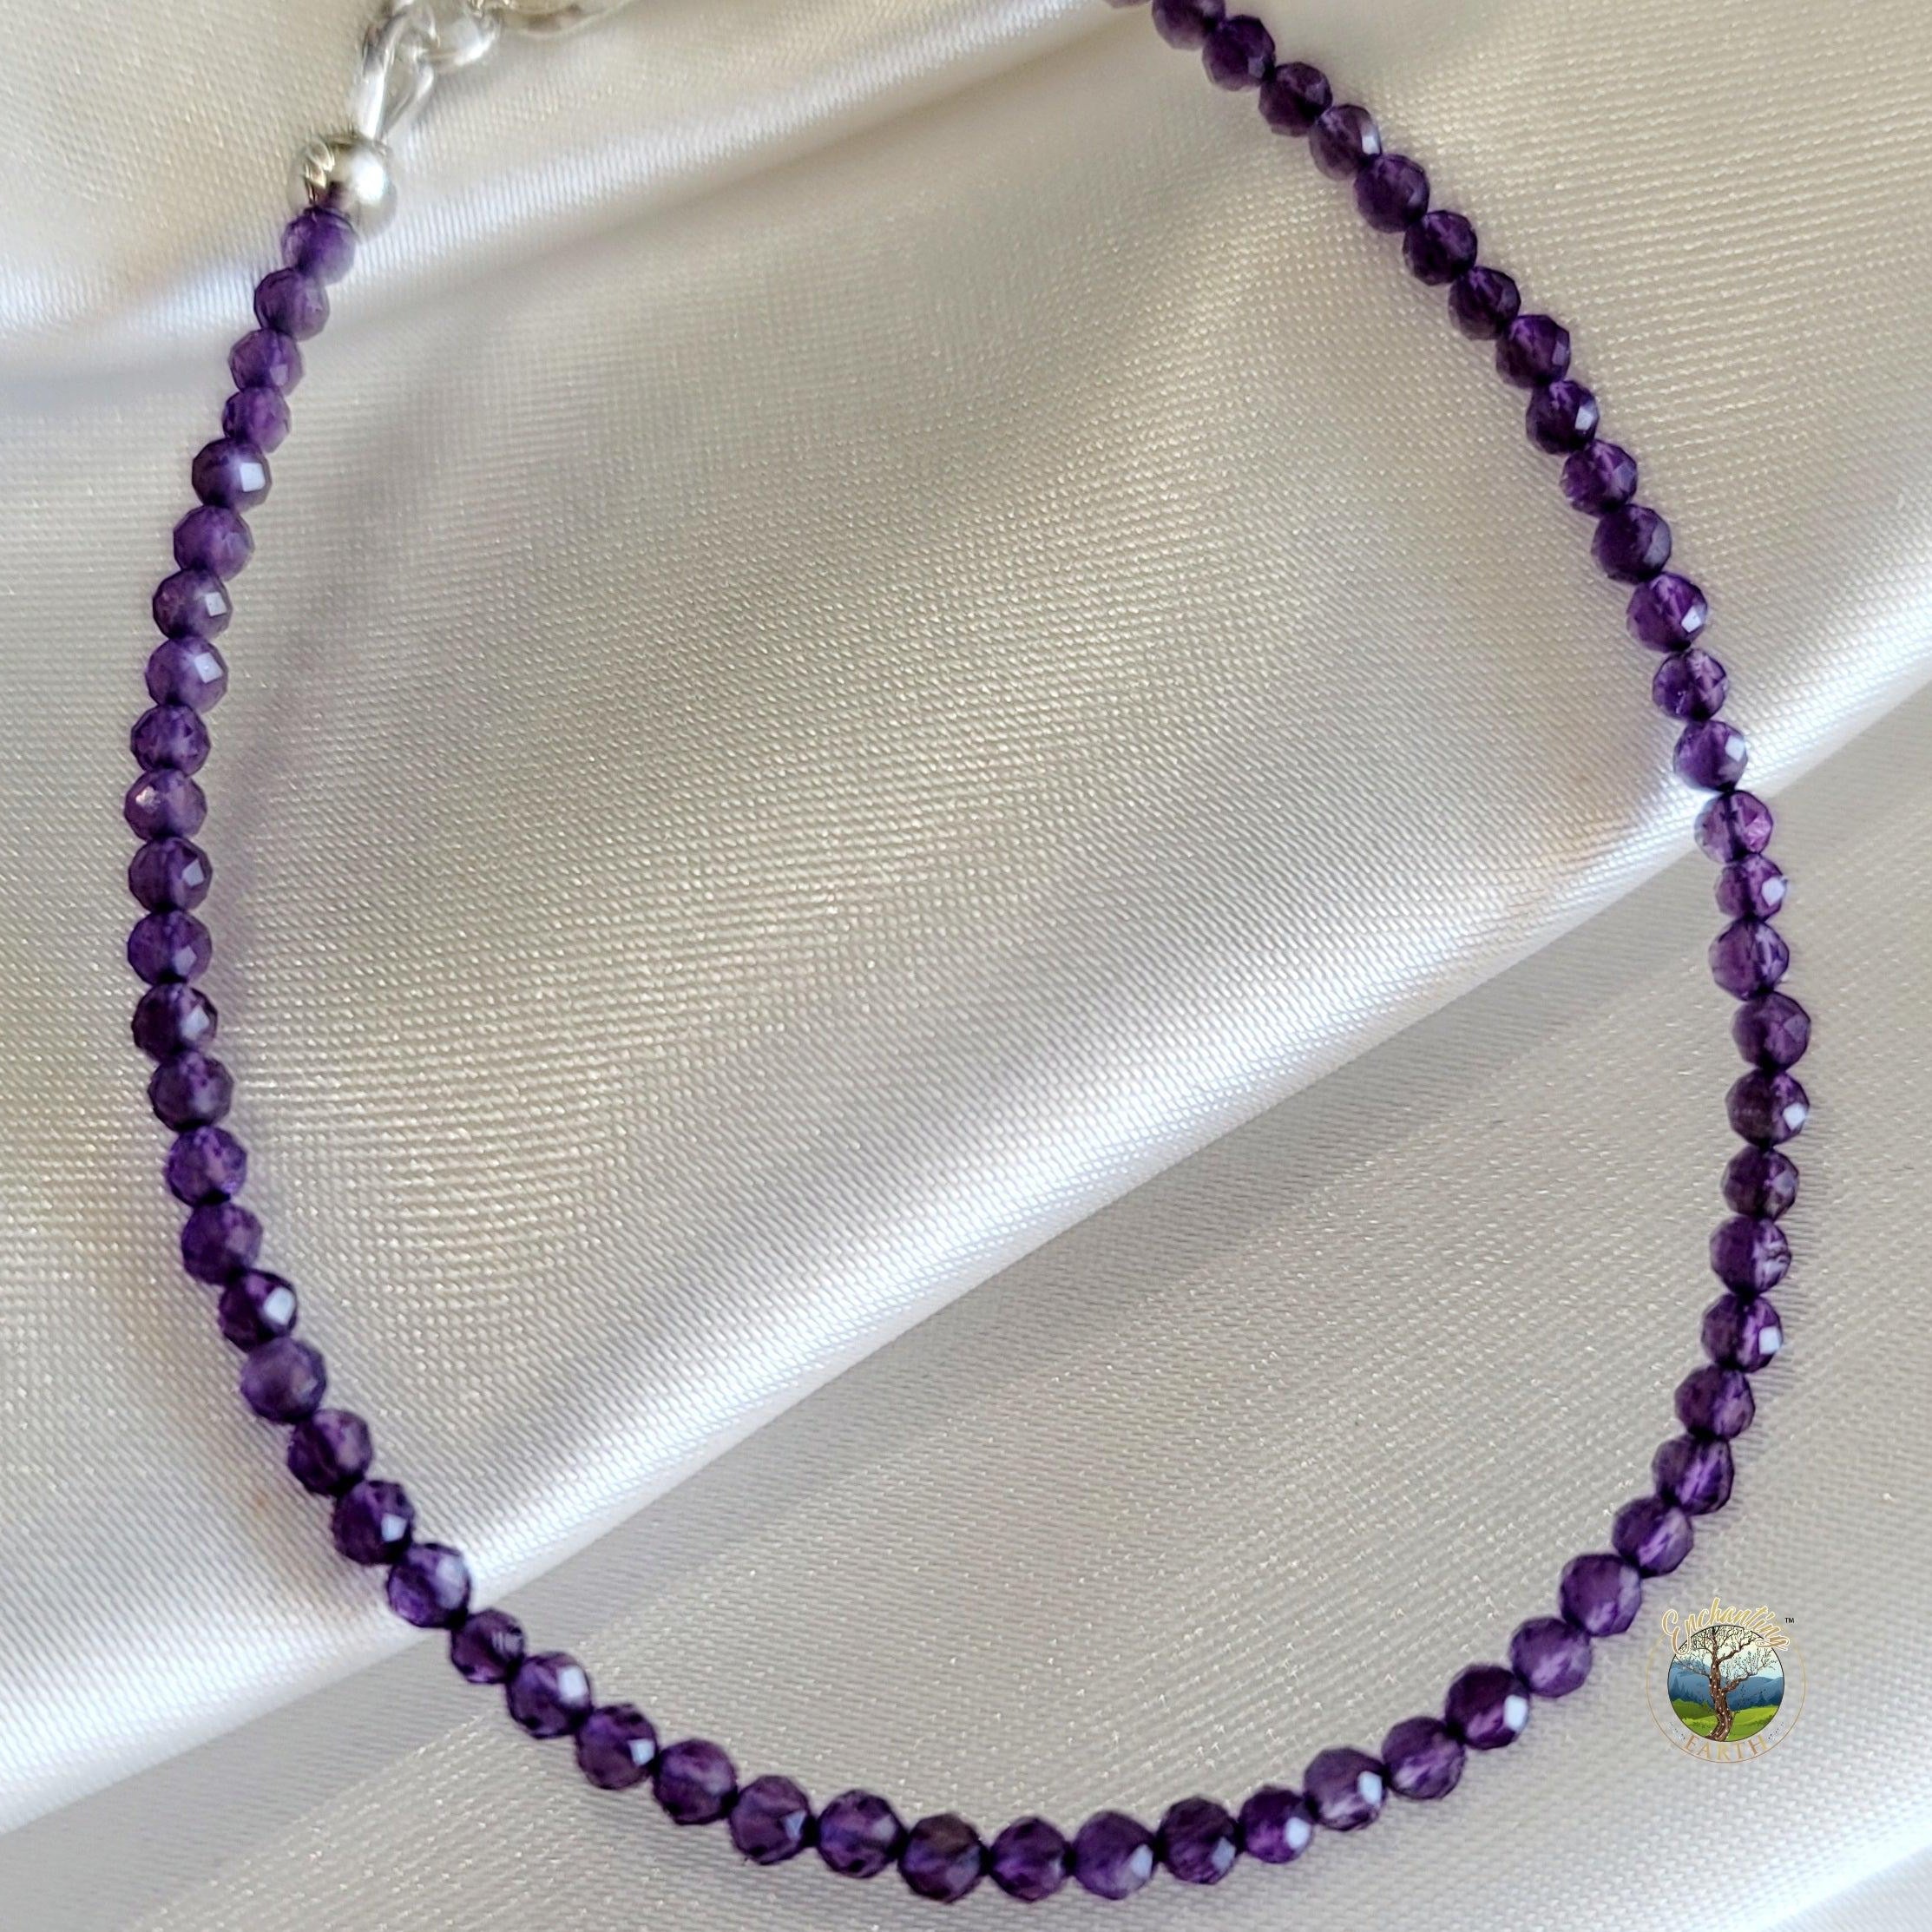 Amethyst Micro Faceted Bracelet for Intuition, Connection with the Divine and Sobriety